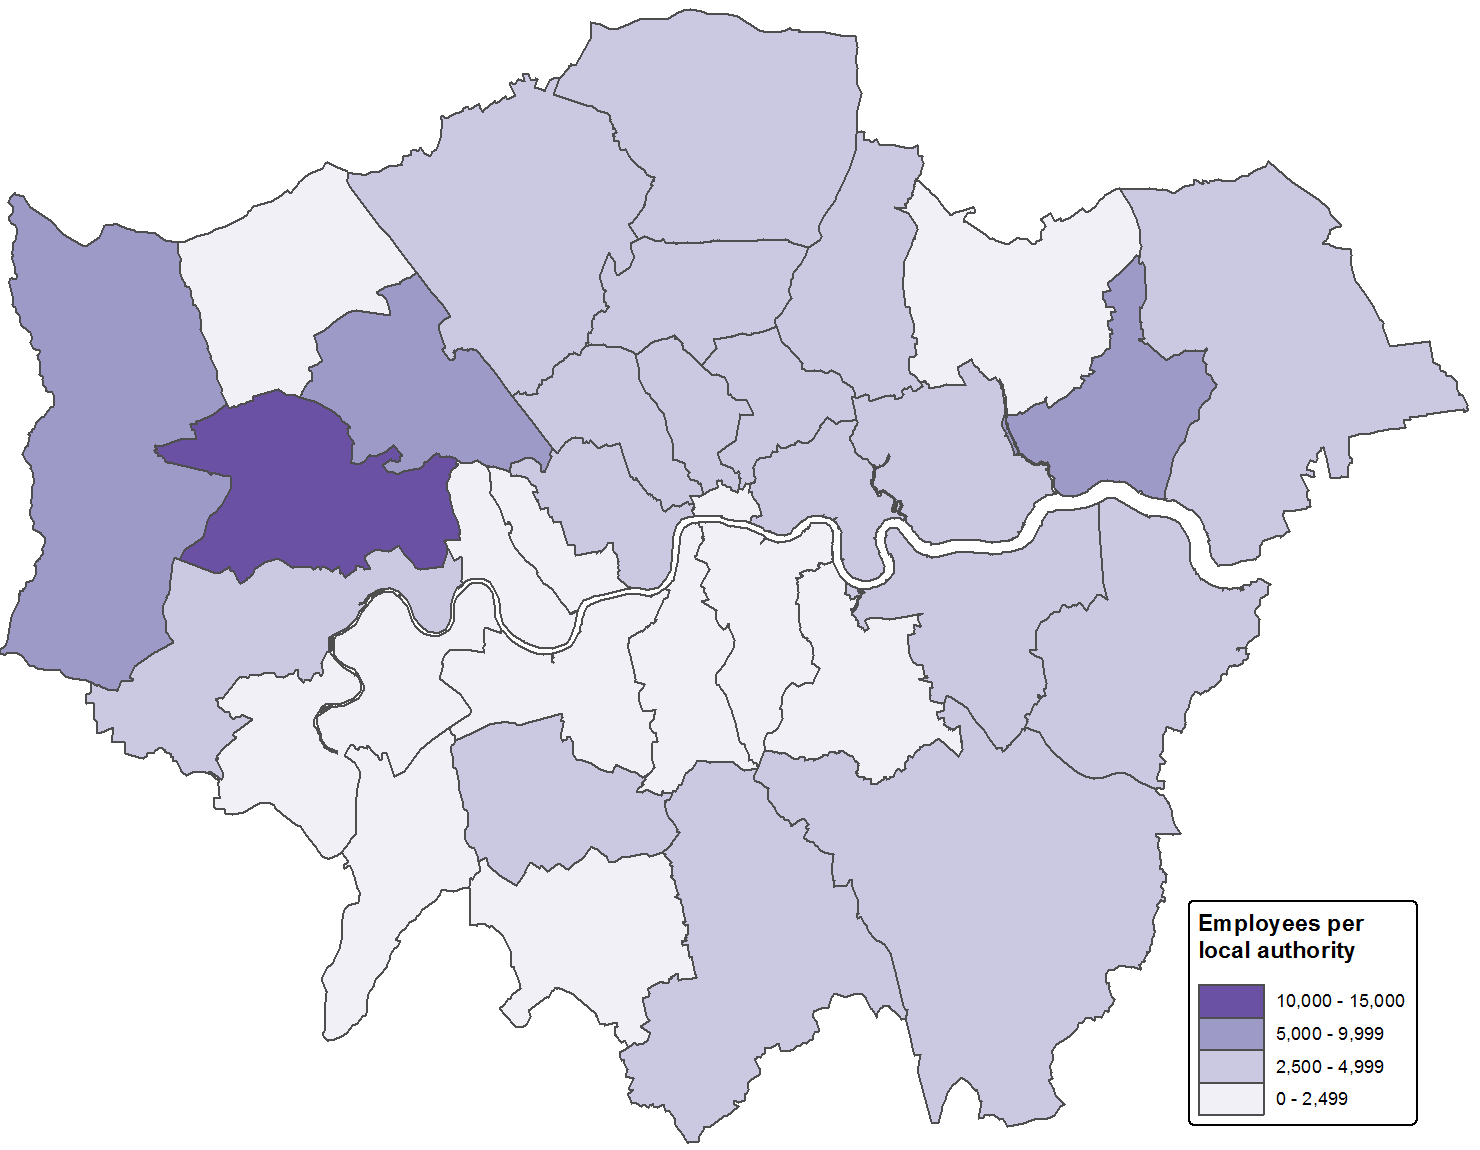 Manufacturing employees are more concentrated in outer London than inner London, moreso in the North than the South, with highest concentrations in the western boroughs Brent, Ealing and Hillingdon.